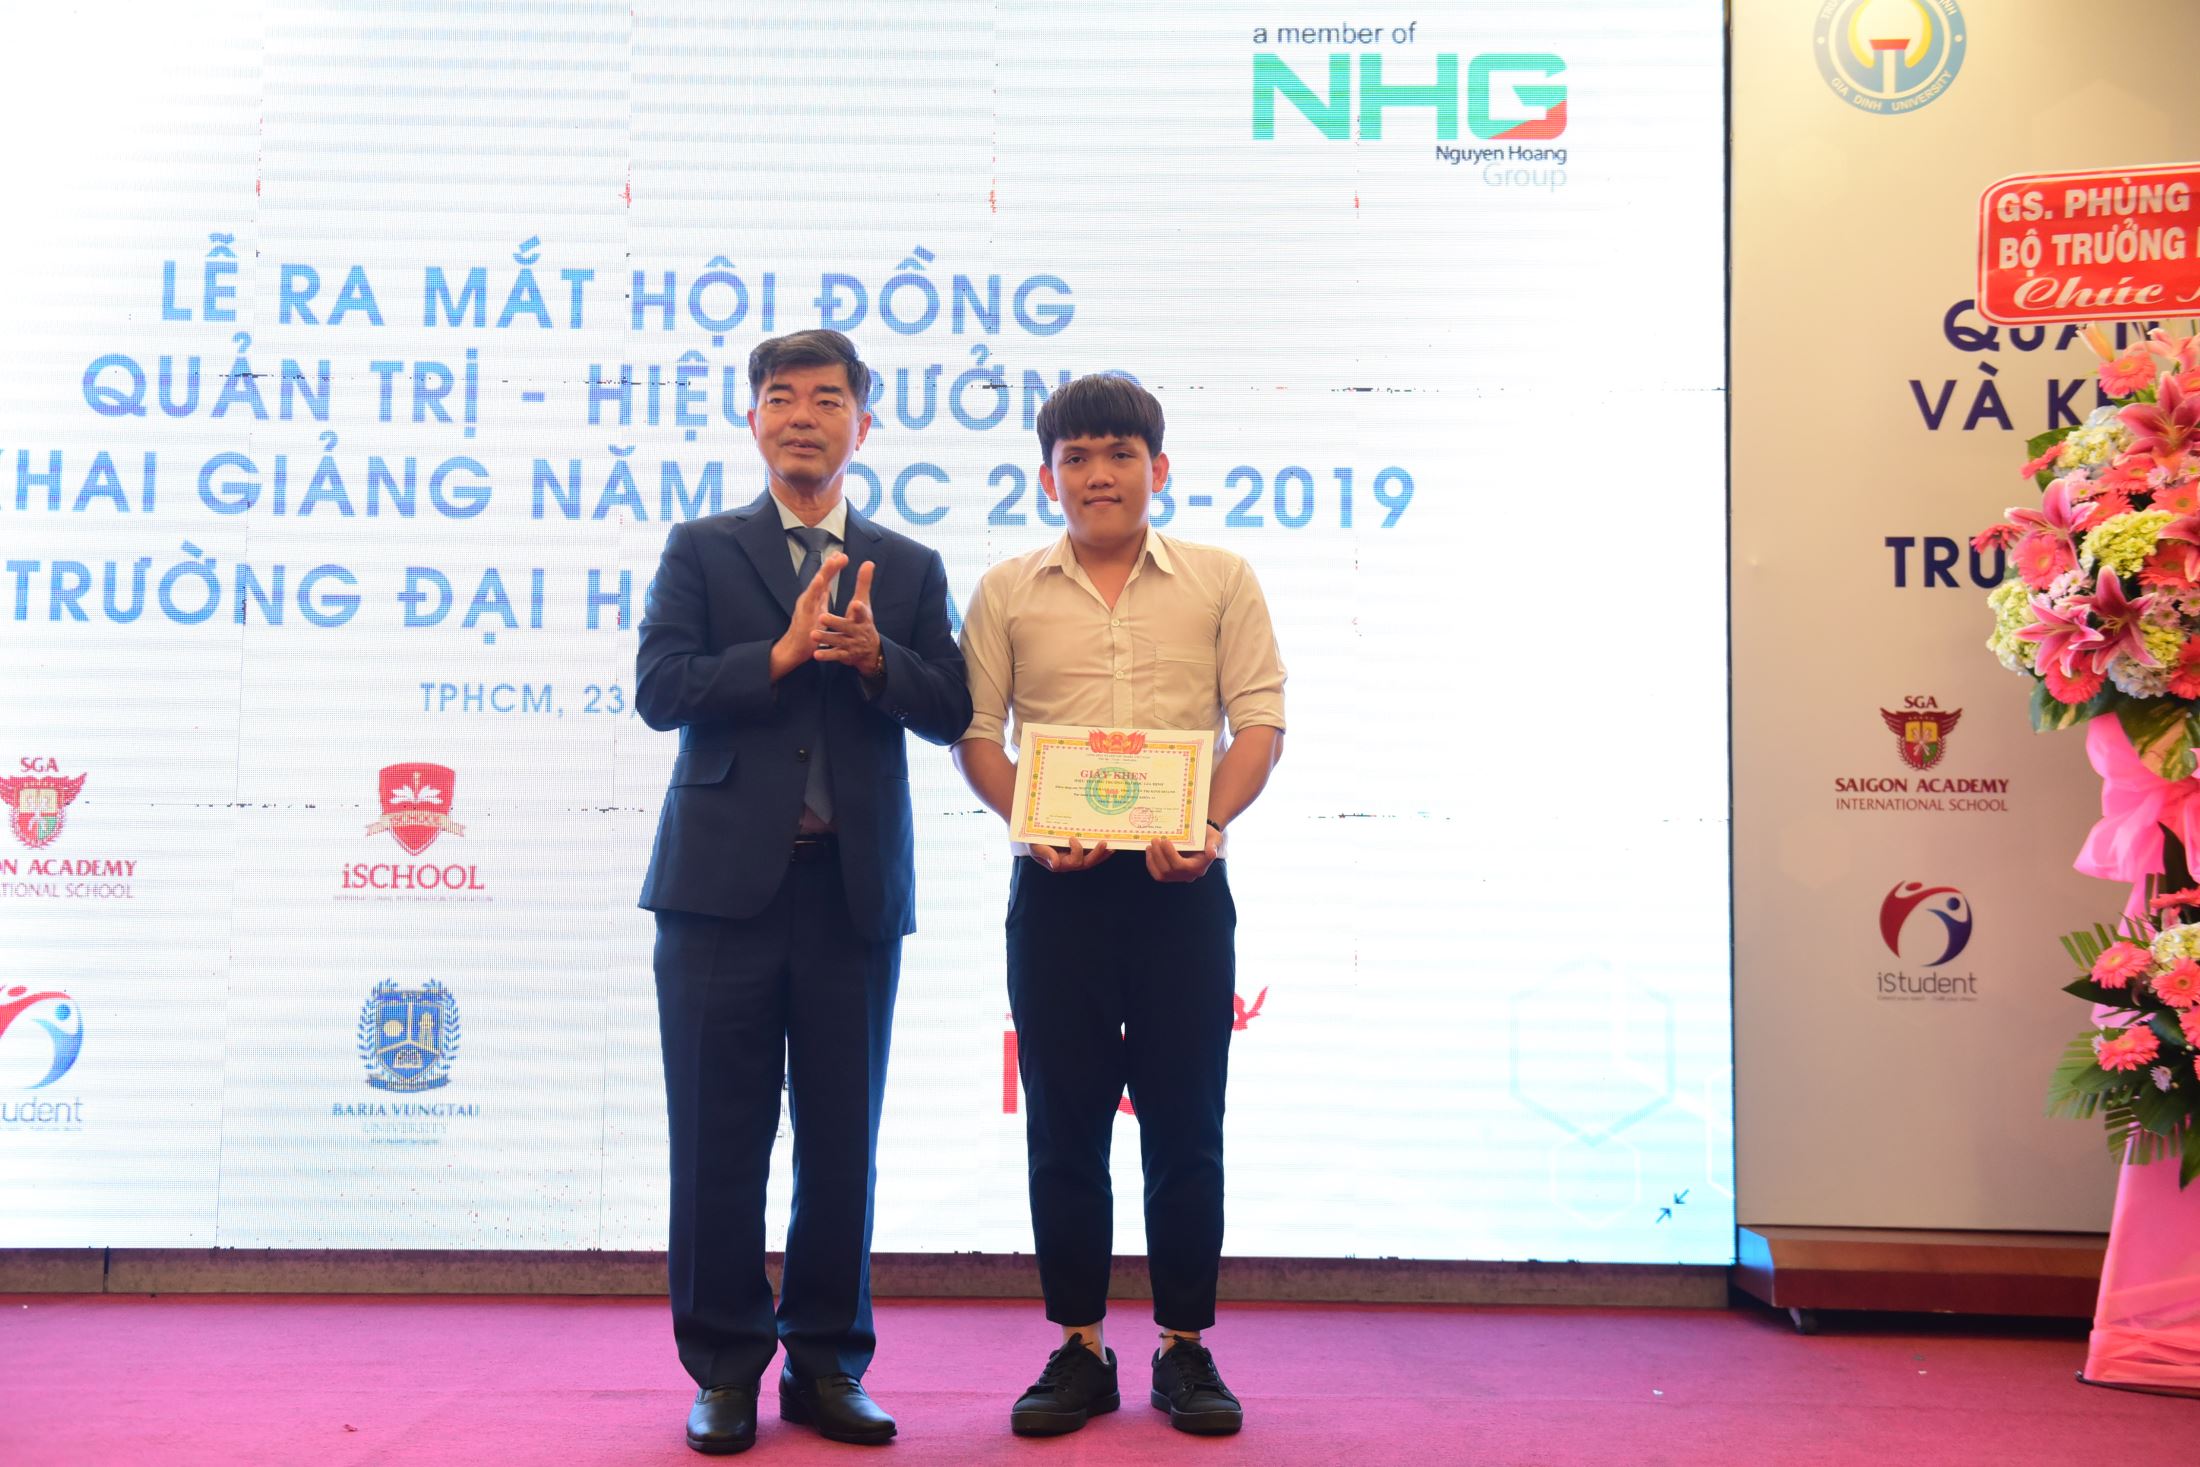 The student who got the highest score on the University entrance examination was awarded a certificate of merit.